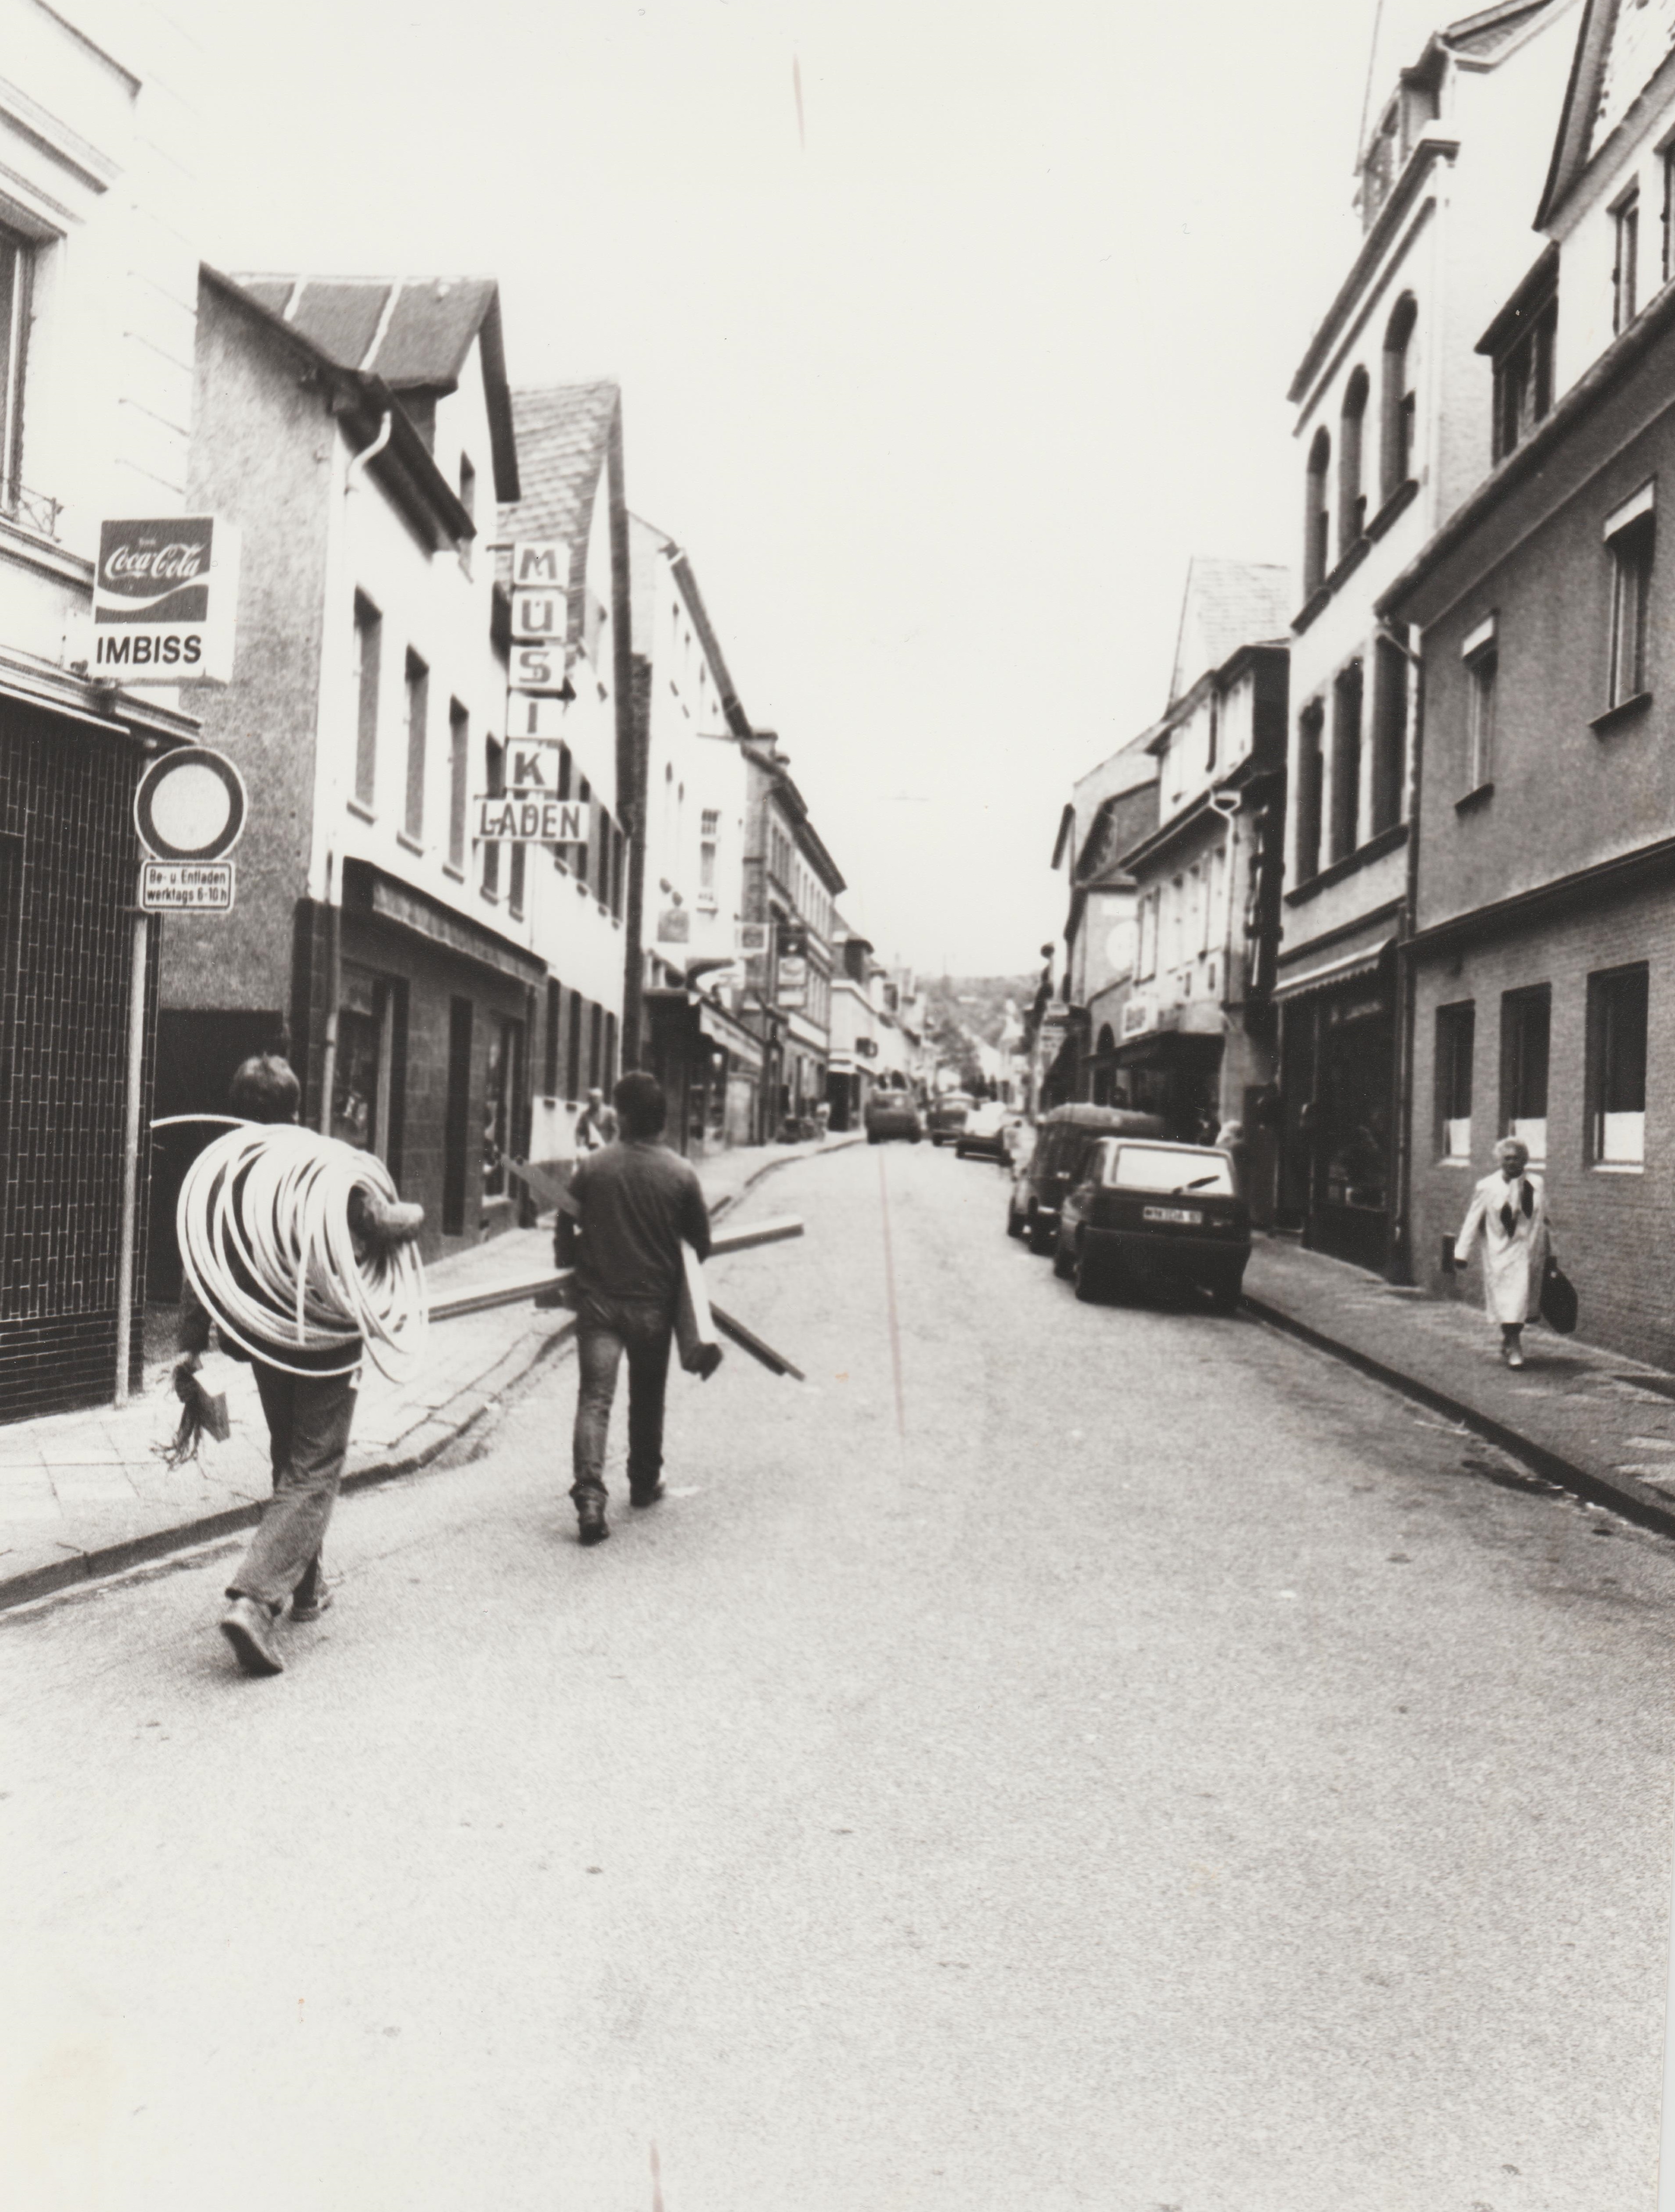 Mittlere Bachstrasse in Bendorf 1983 (REM CC BY-NC-SA)